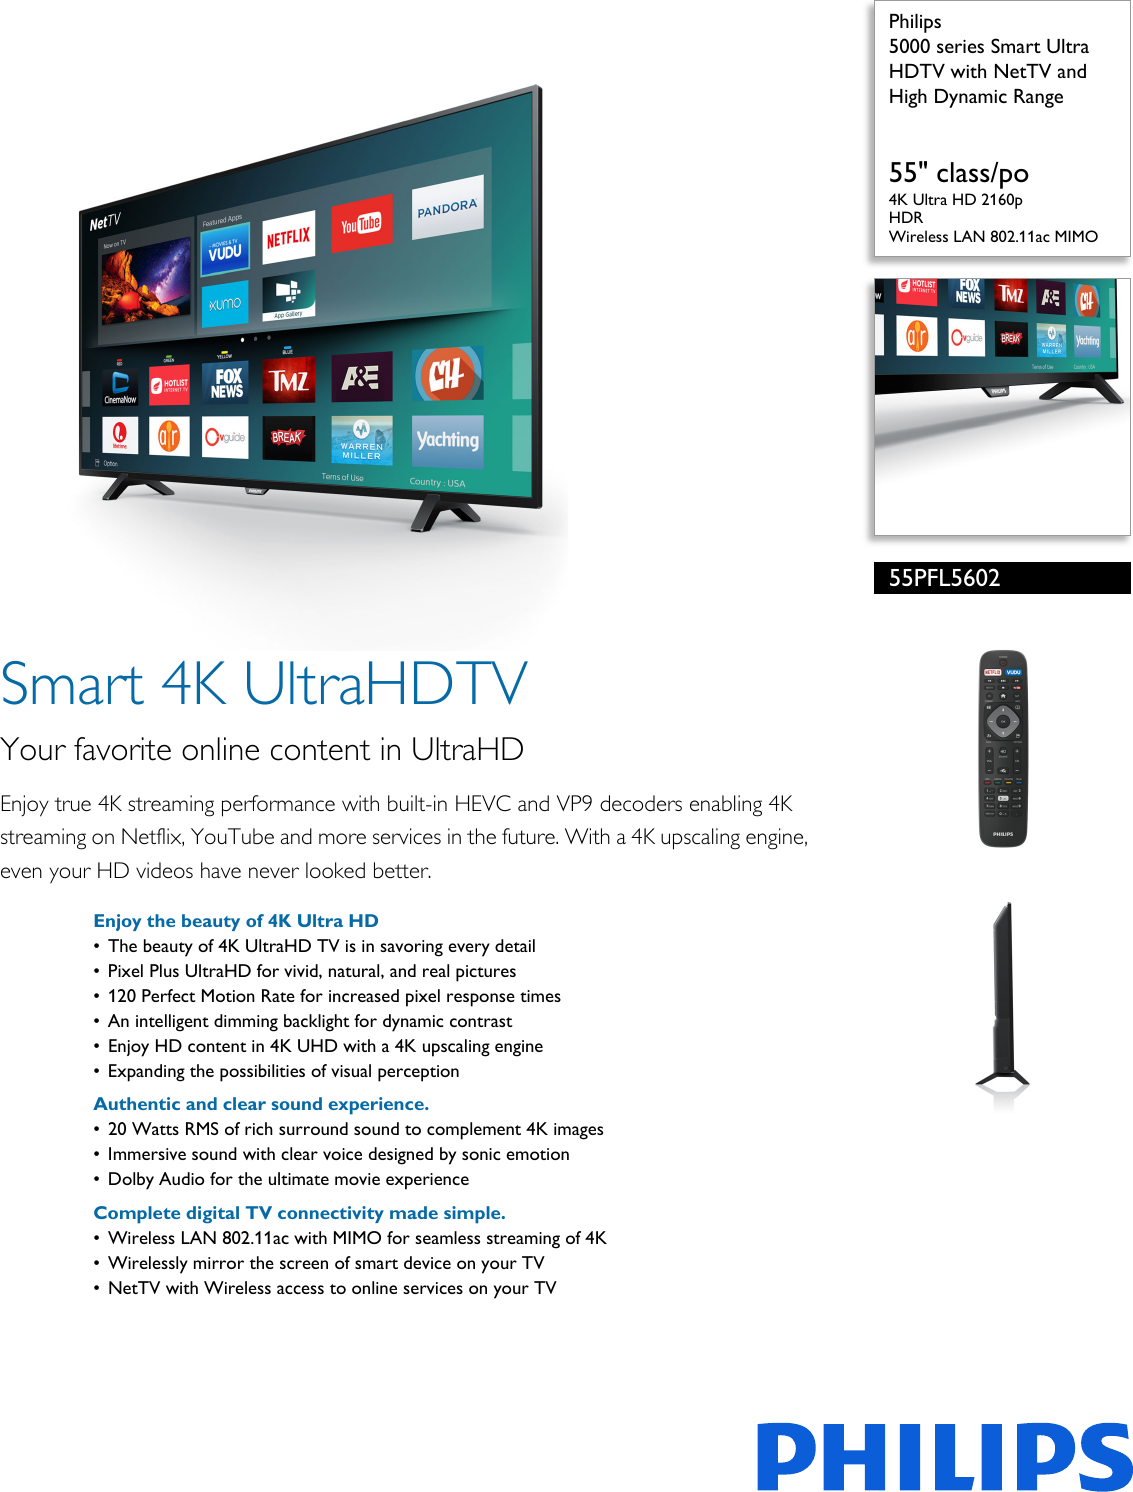 Page 1 of 3 - Philips 55PFL5602/F7 5000 Series Smart Ultra HDTV With NetTV And High Dynamic Range User Manual Leaflet 55pfl5602 F7 Pss Aenus